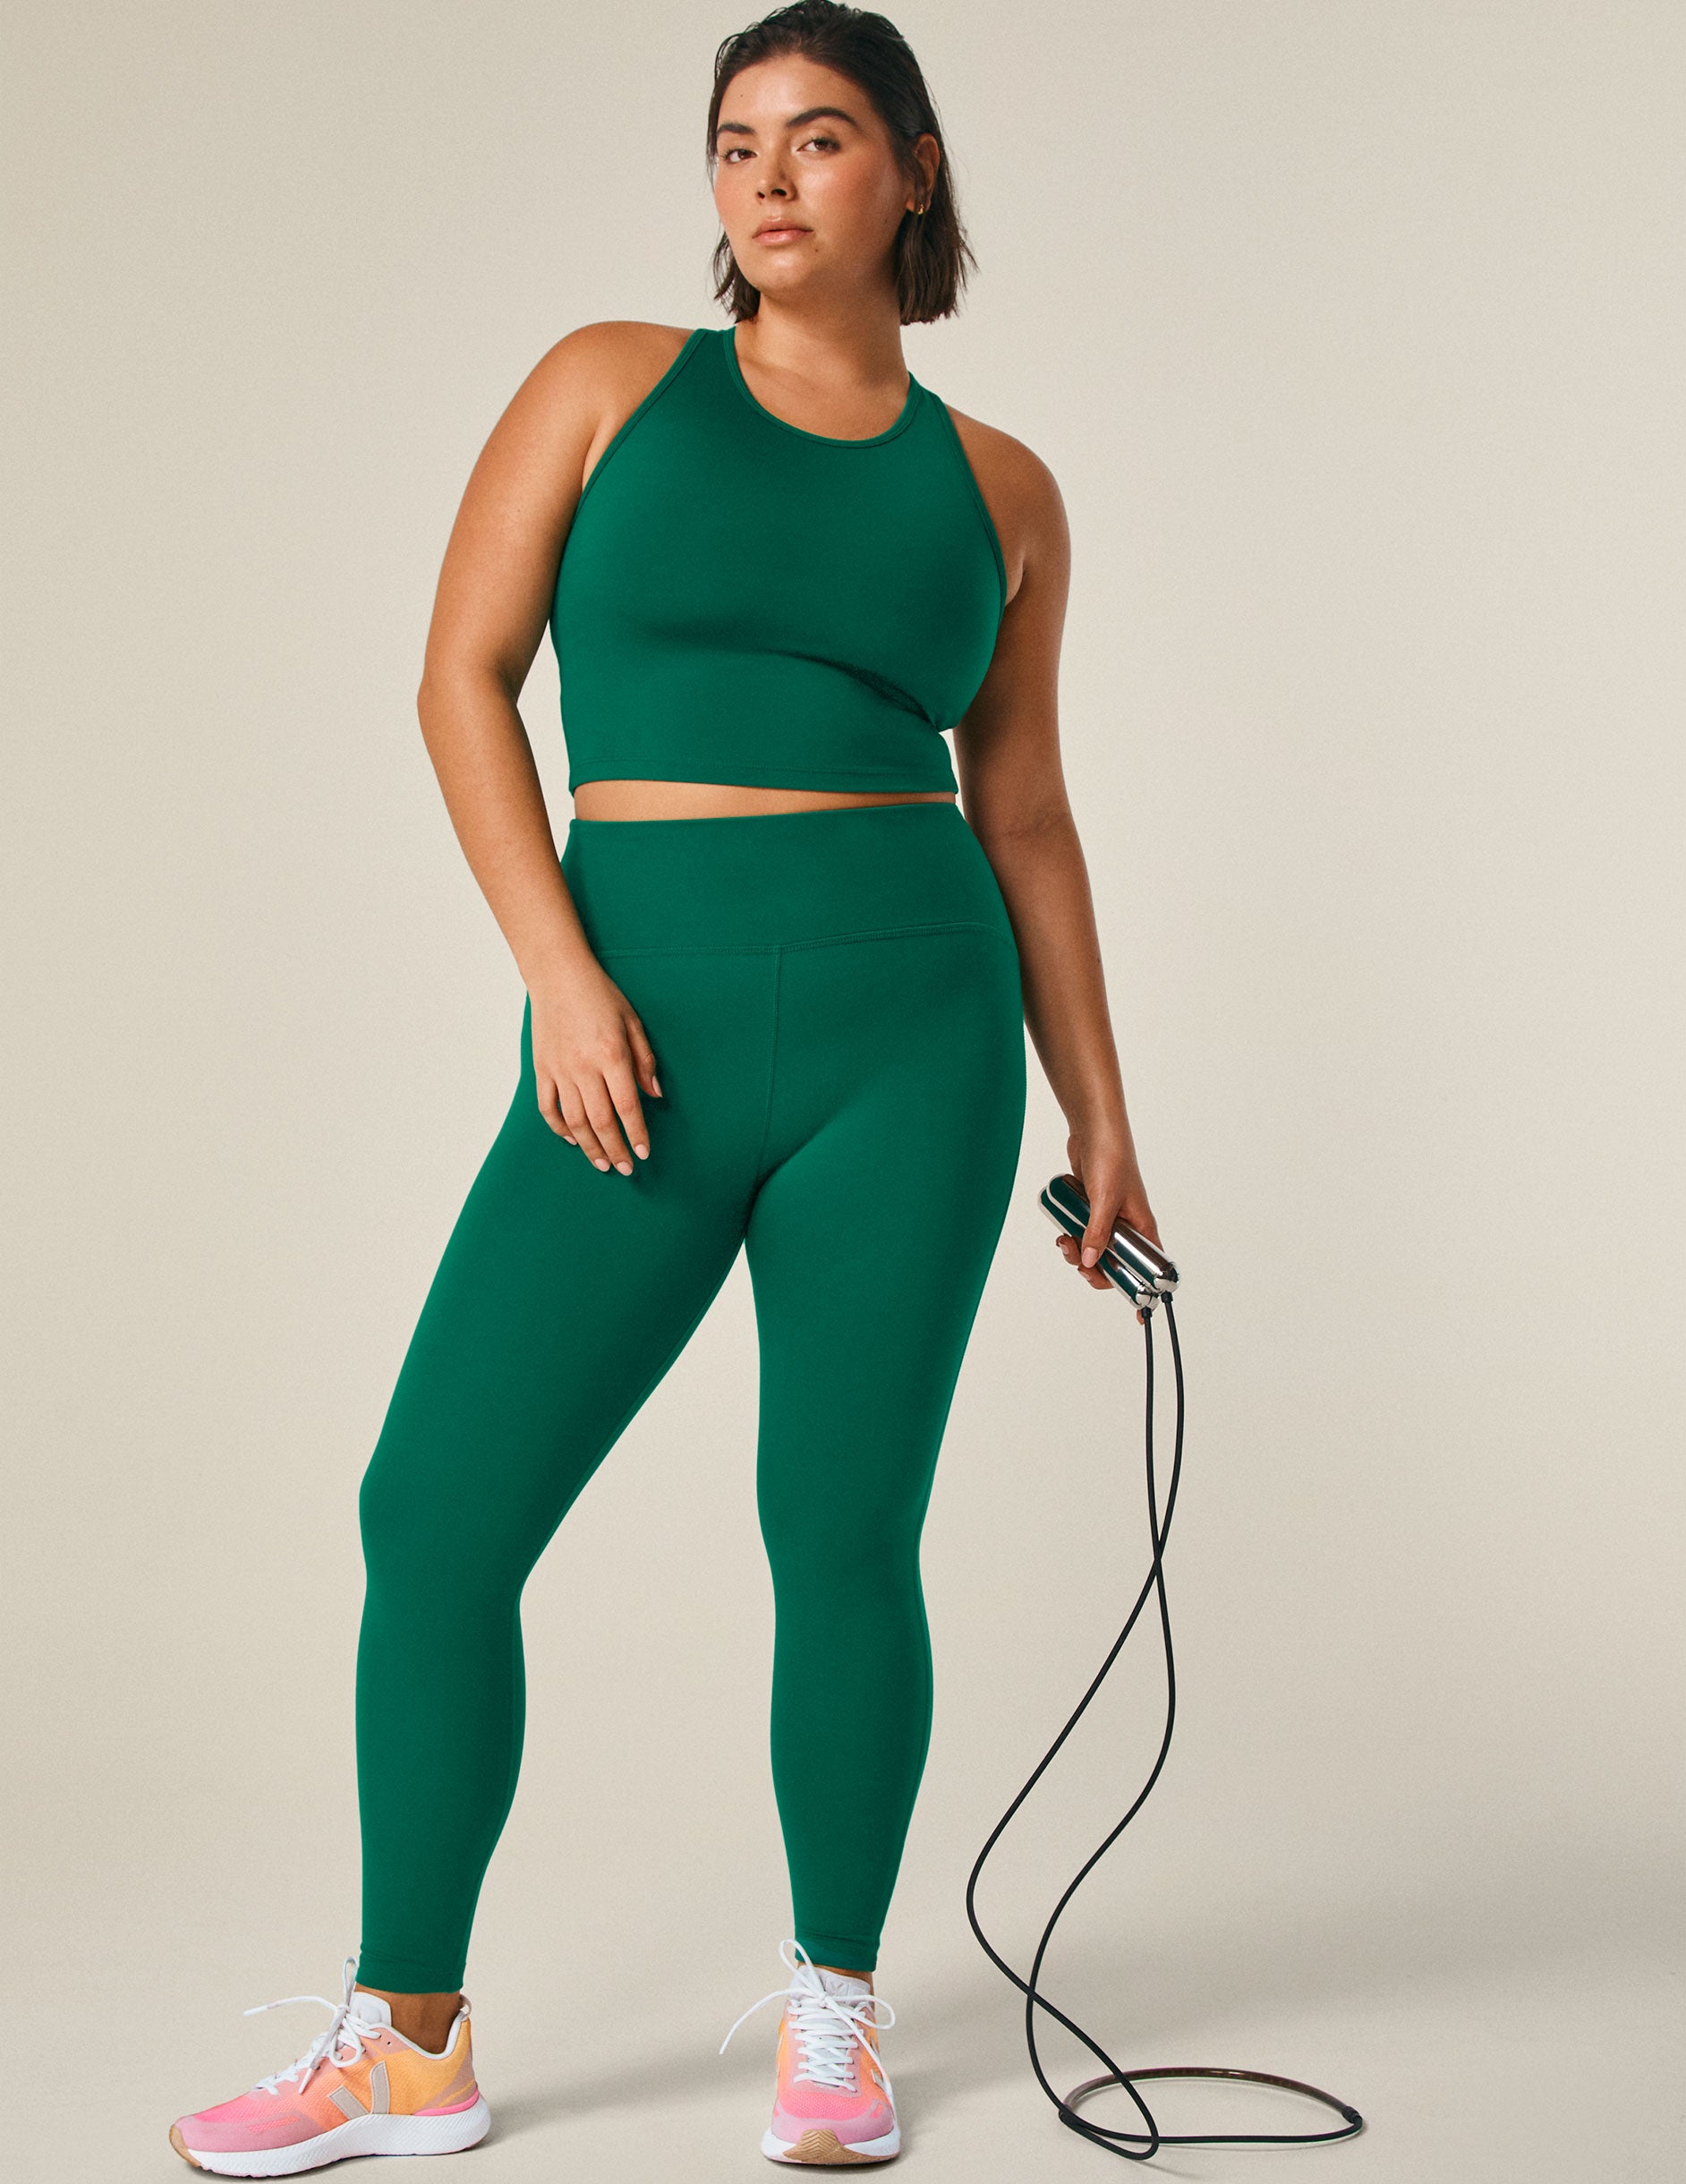 green scoop neck racerback cropped tank with an open back detail held with bartacks.